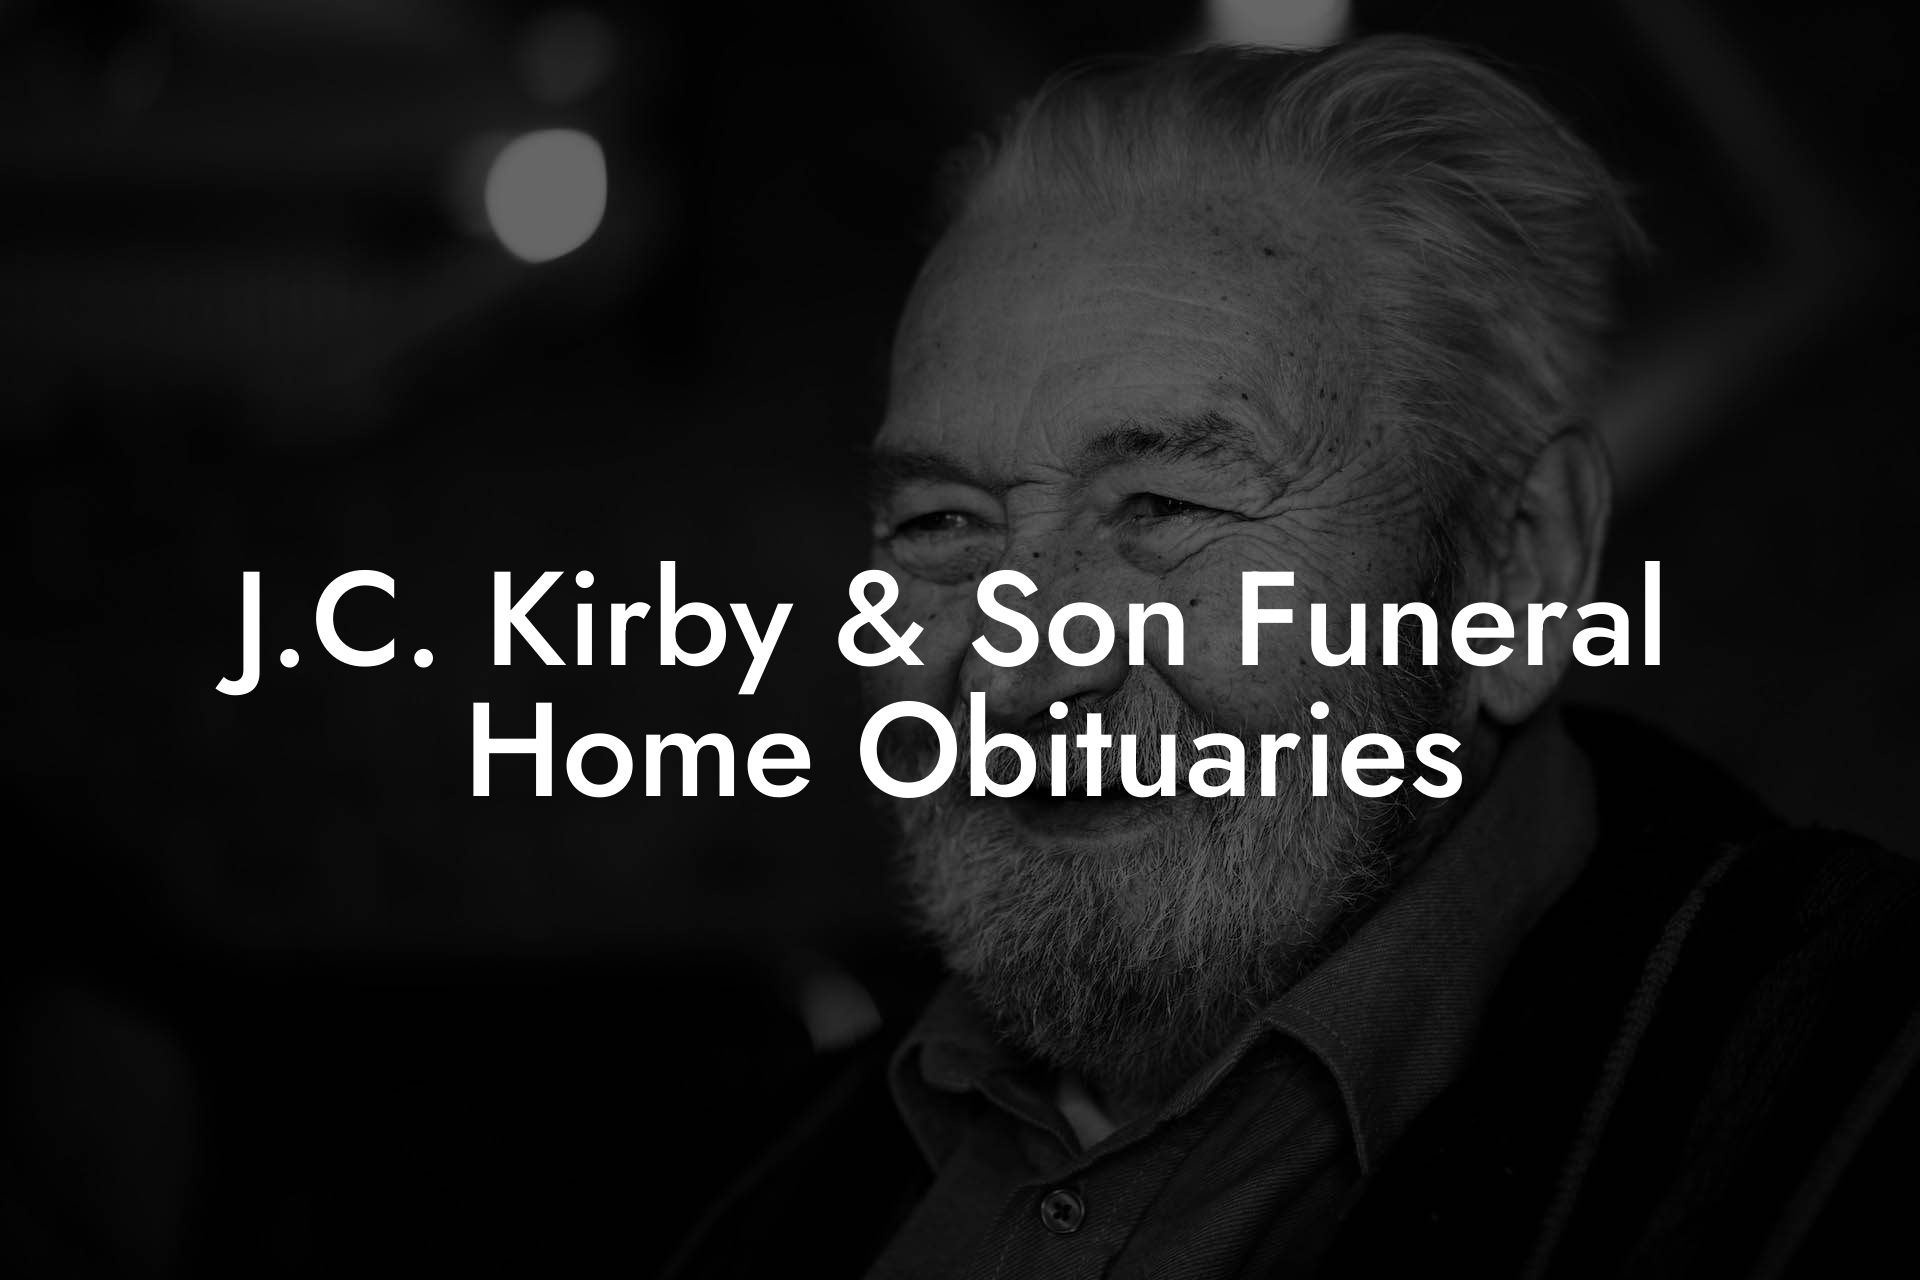 J.C. Kirby & Son Funeral Home Obituaries